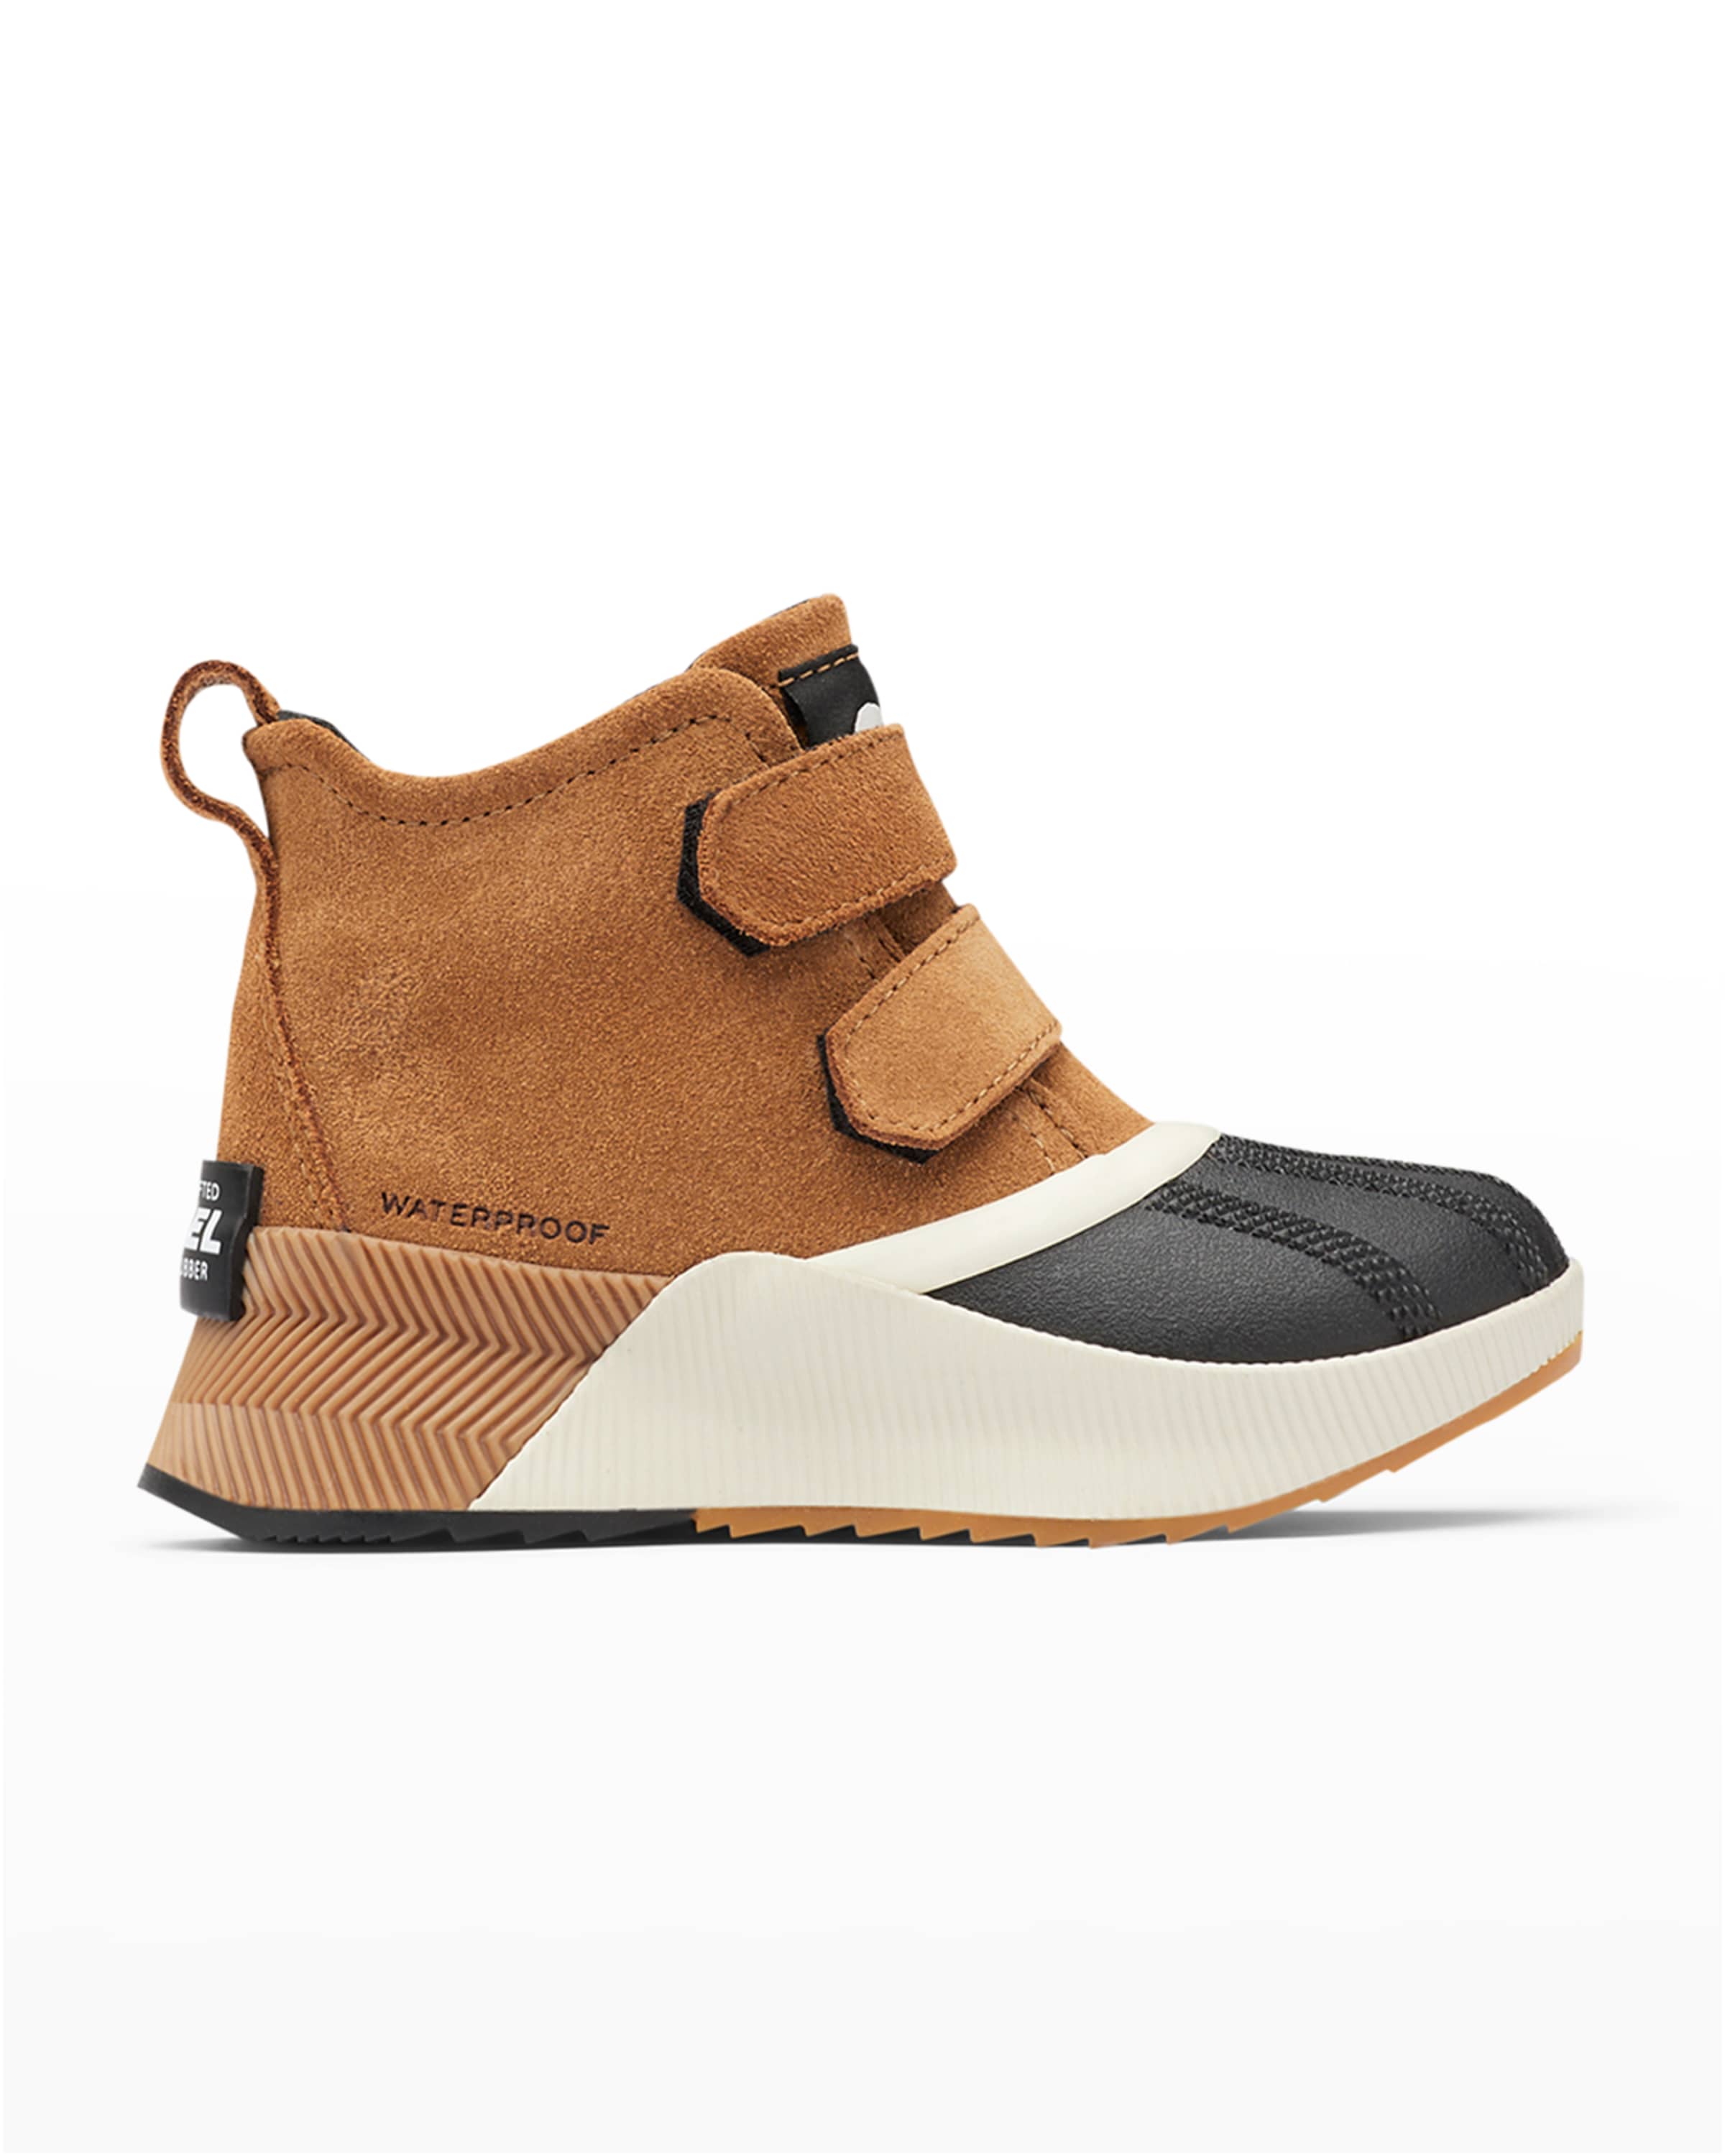 Kid's Out 'n About Classic Waterproof Boot - Camel Brown